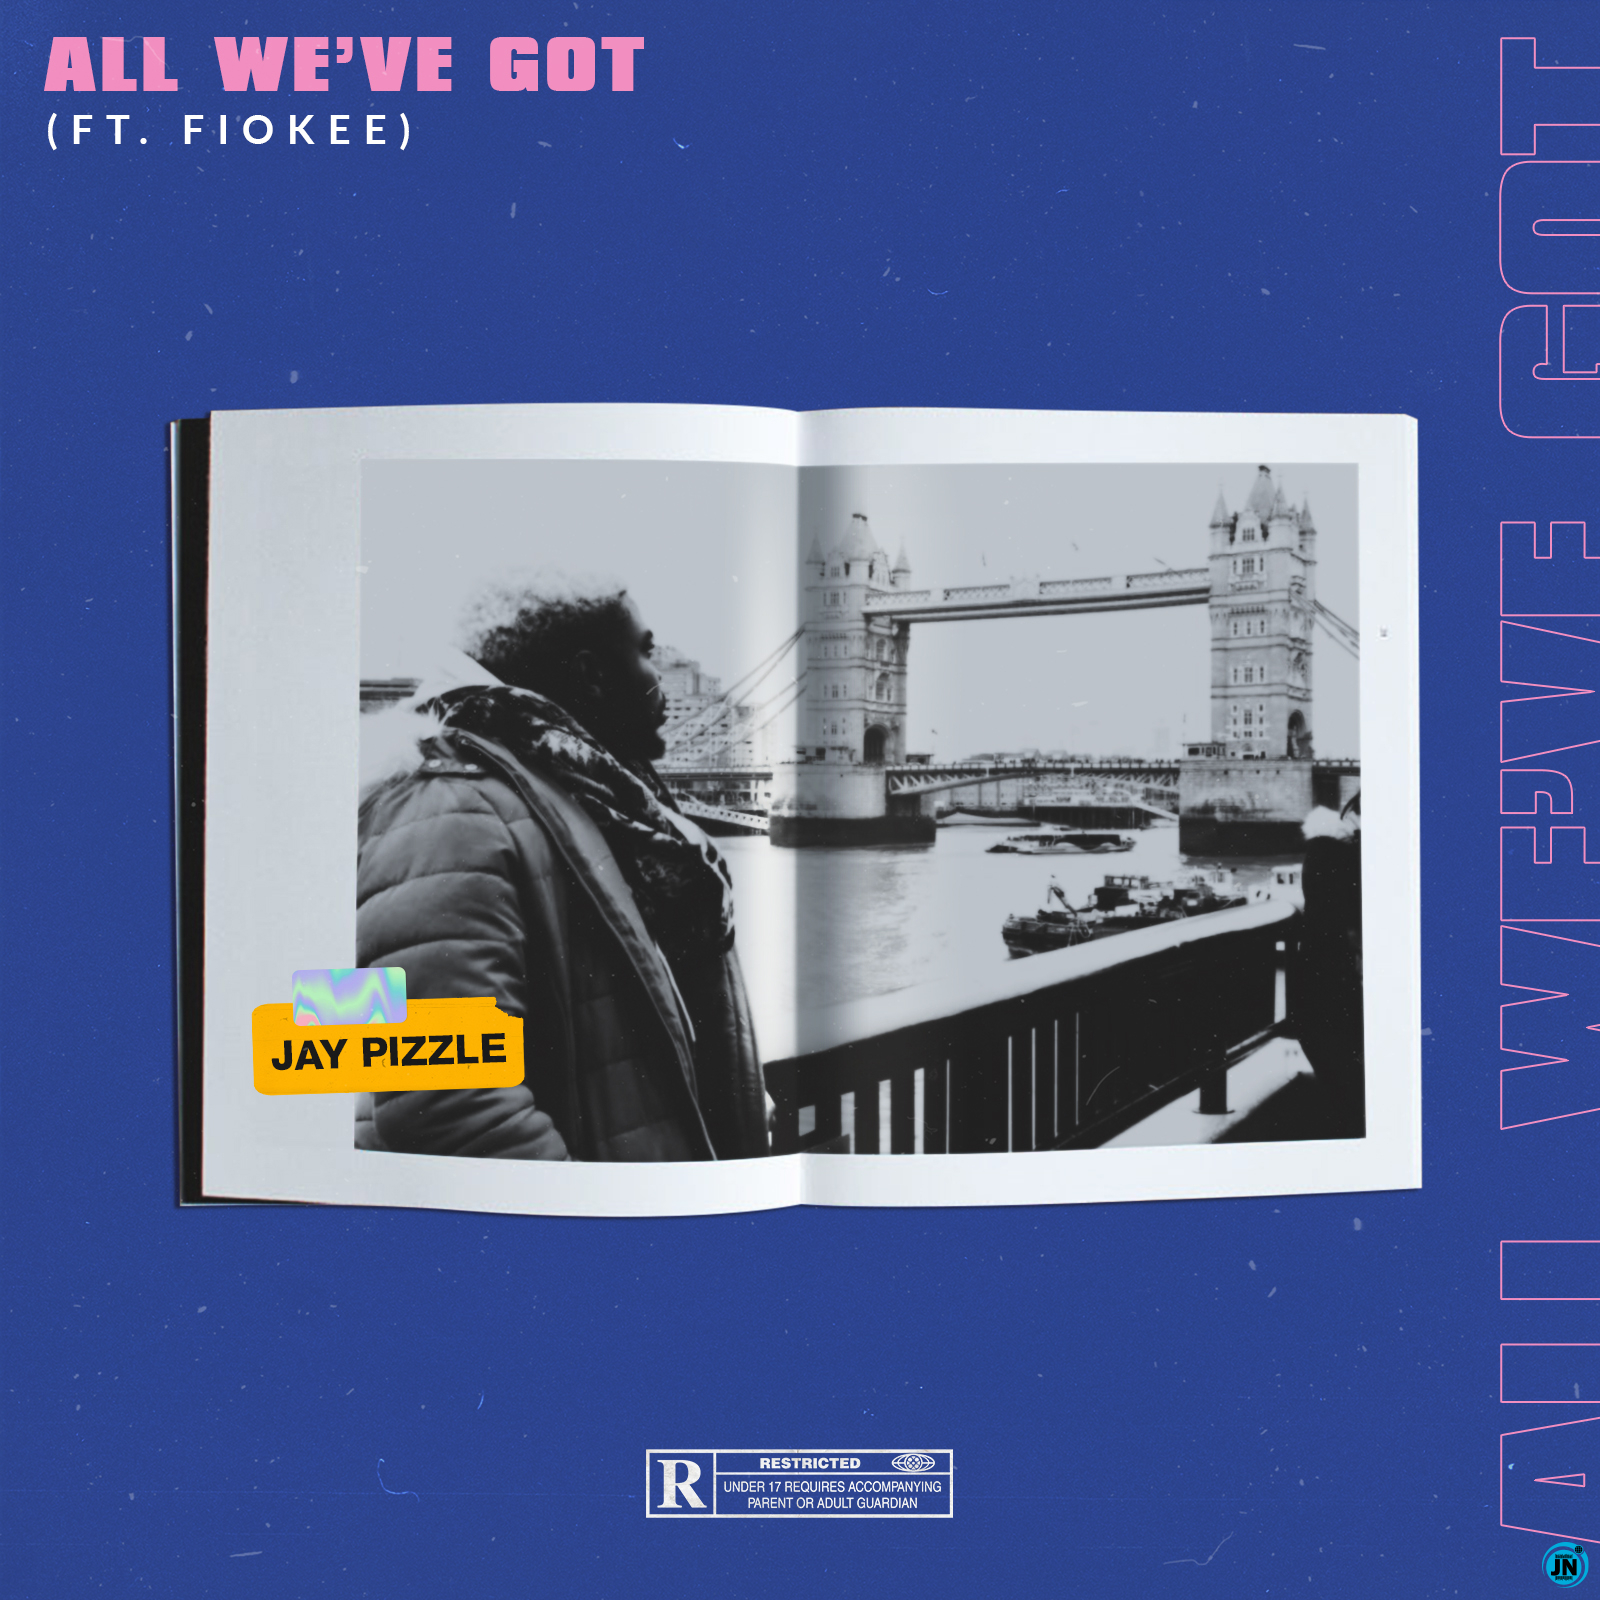 Jay Pizzle - All We've Got ft. Fiokee   Mp3 Download lyrics